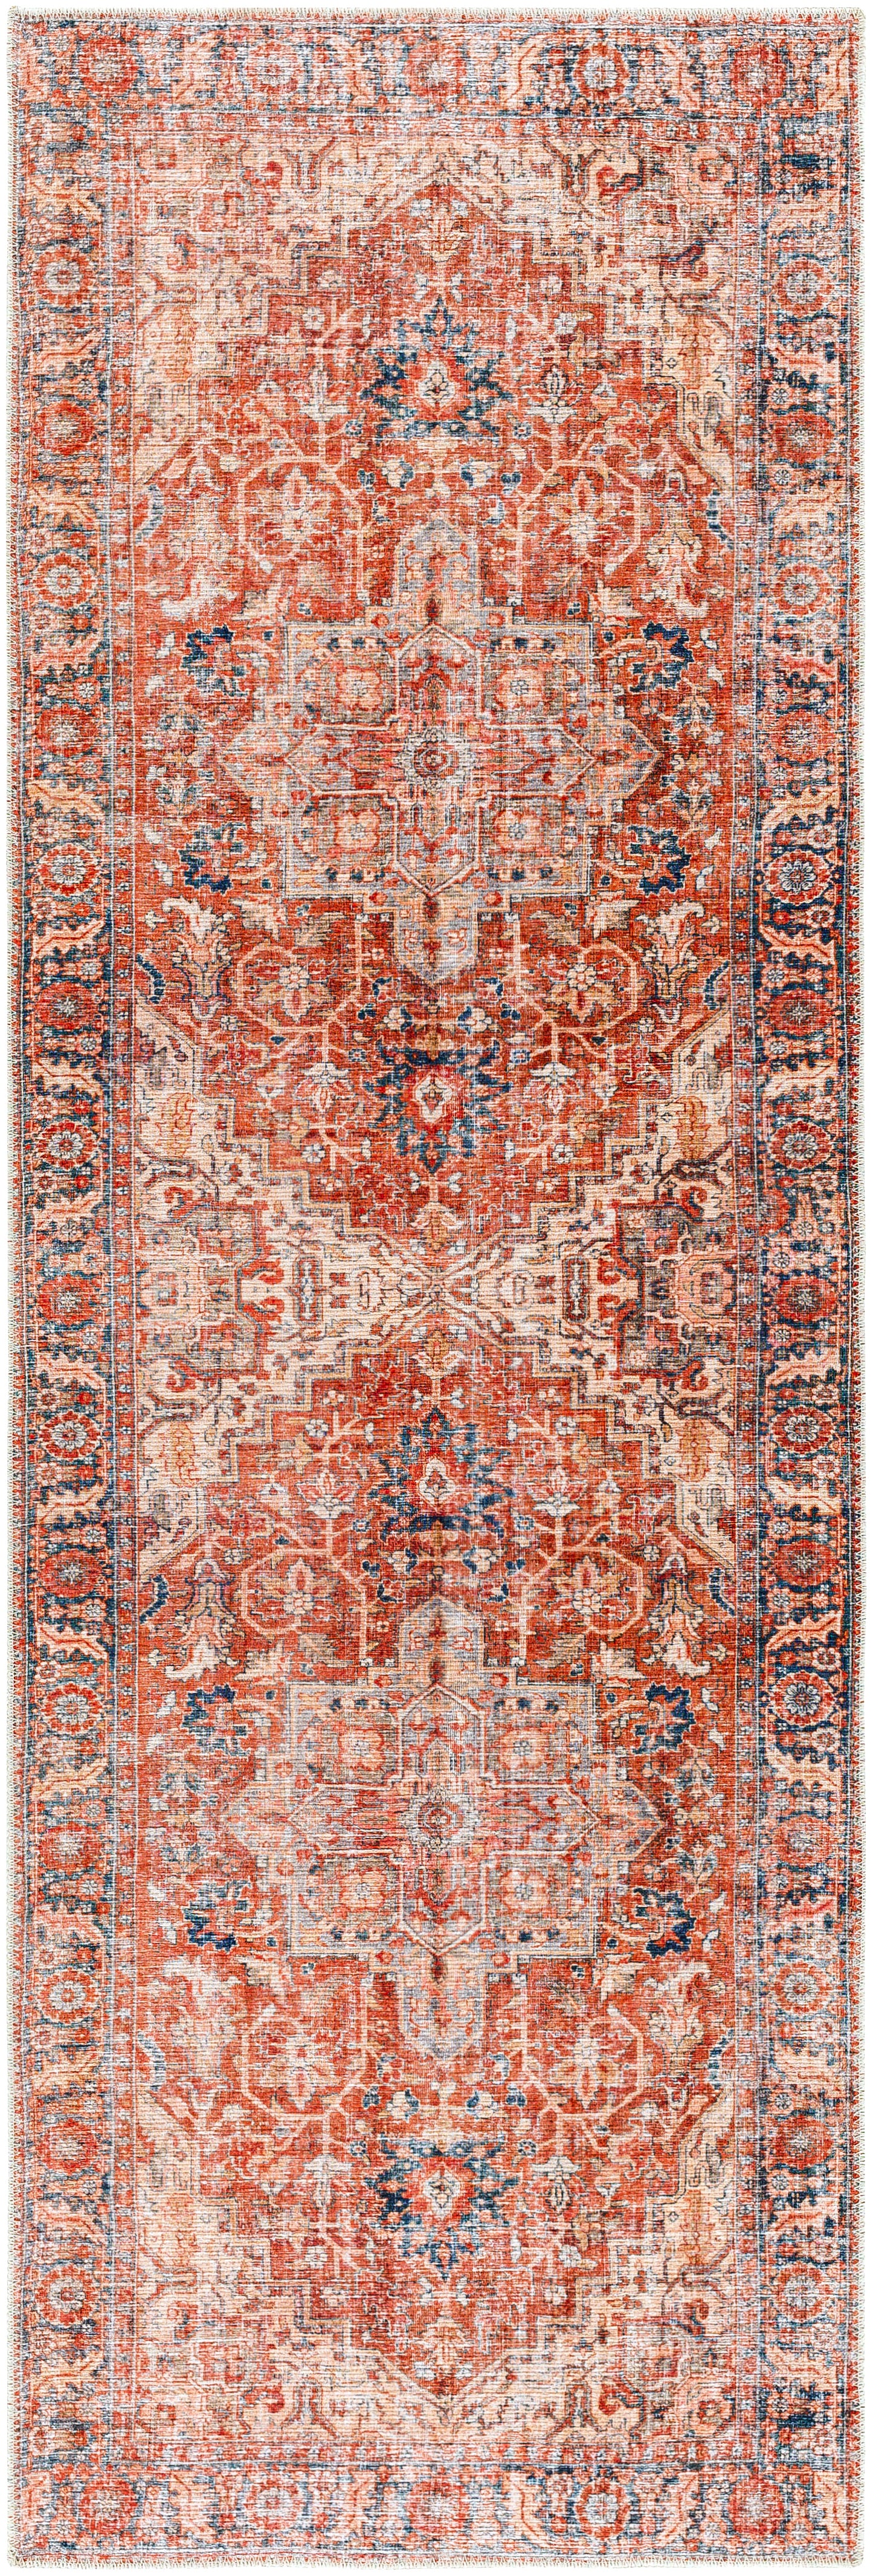 Amelie 29516 Machine Woven Synthetic Blend Indoor Area Rug by Surya Rugs